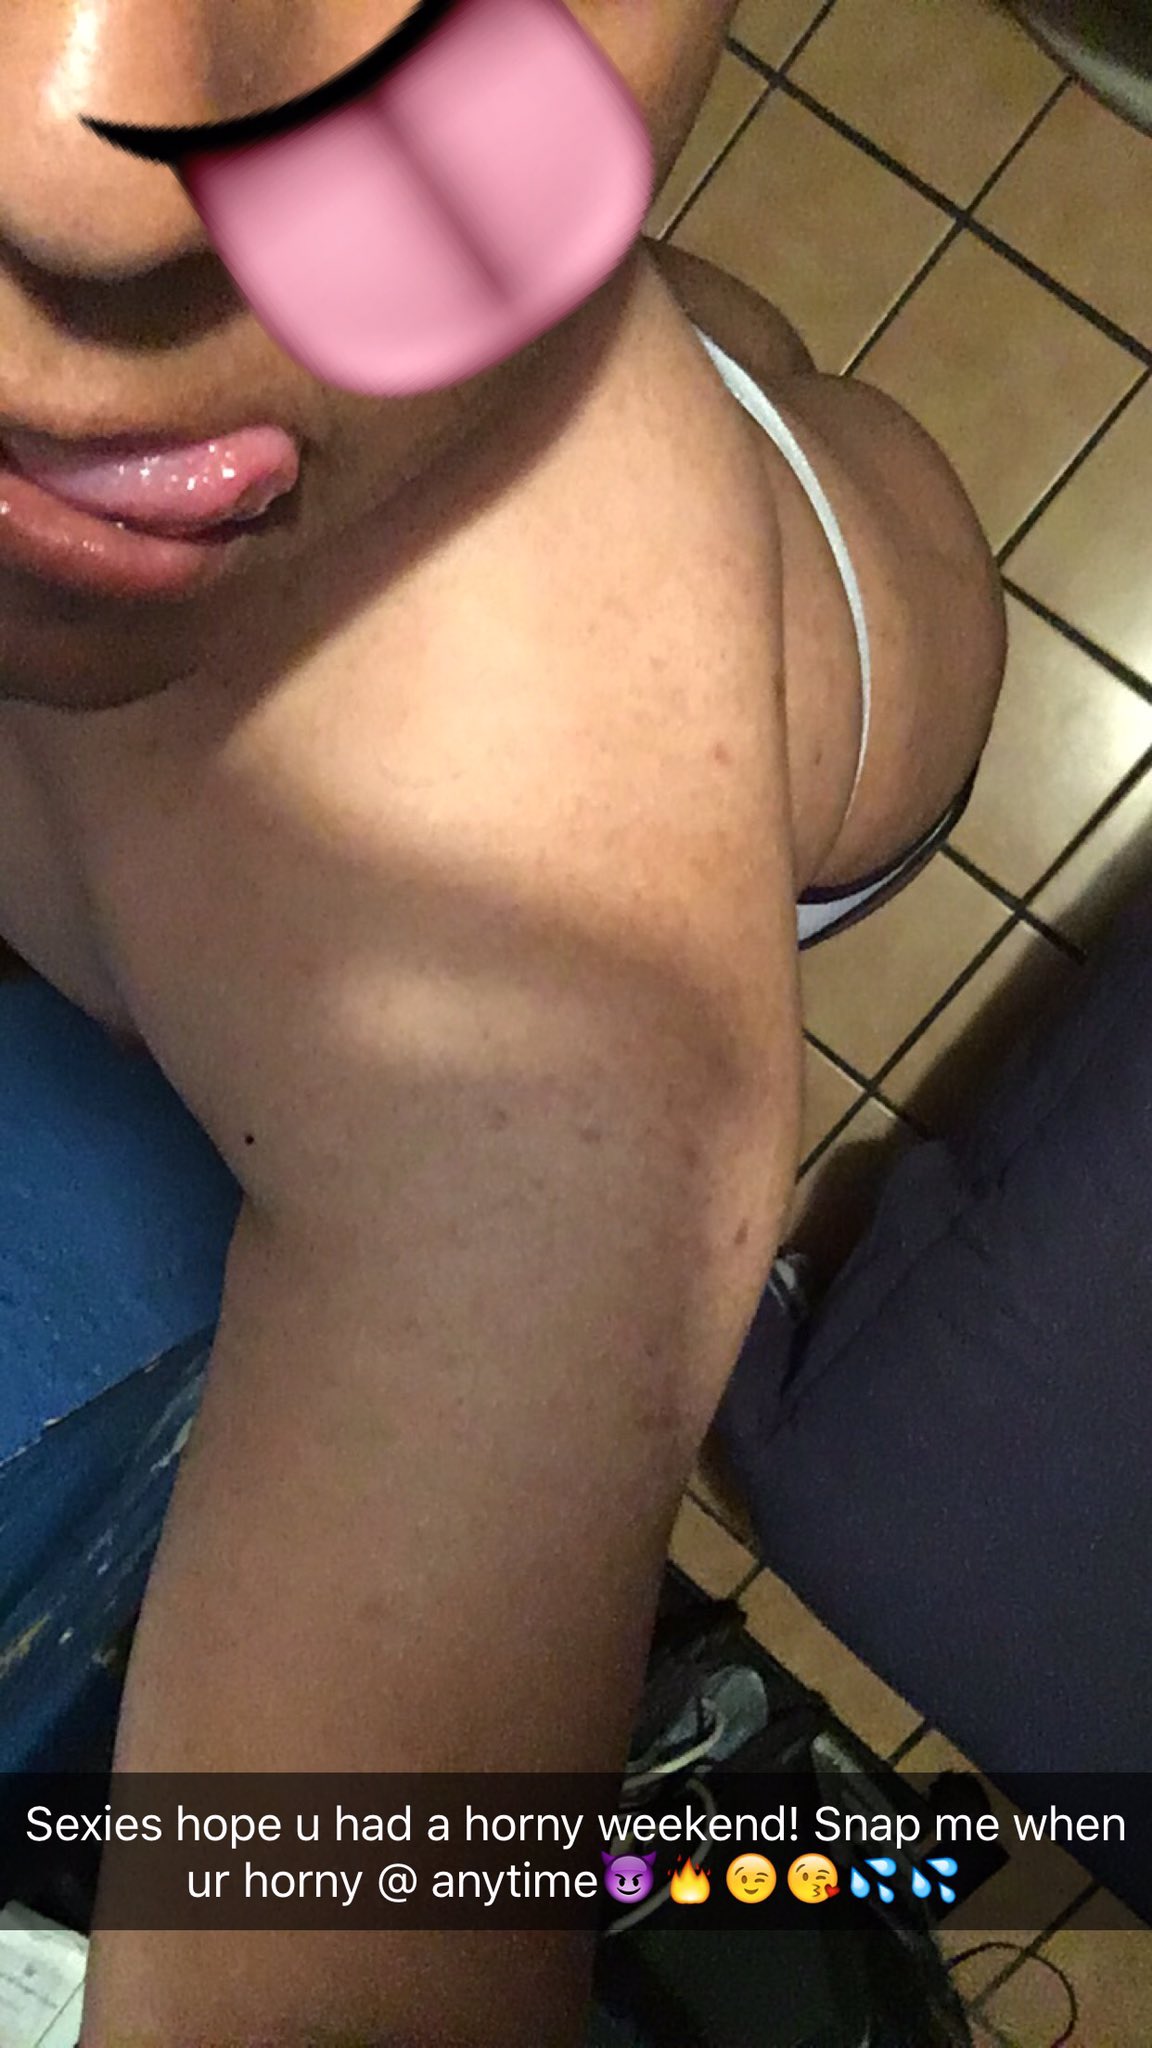 Bootydevine(Ben) 🏆🎥⭐️ on X: Dirty snaps anal play dirty convos! Or just  to make u cum! #Snapchat: bootydevine gay bi str8 curious guys only 21+  t.coCbI9IFvl5W  X